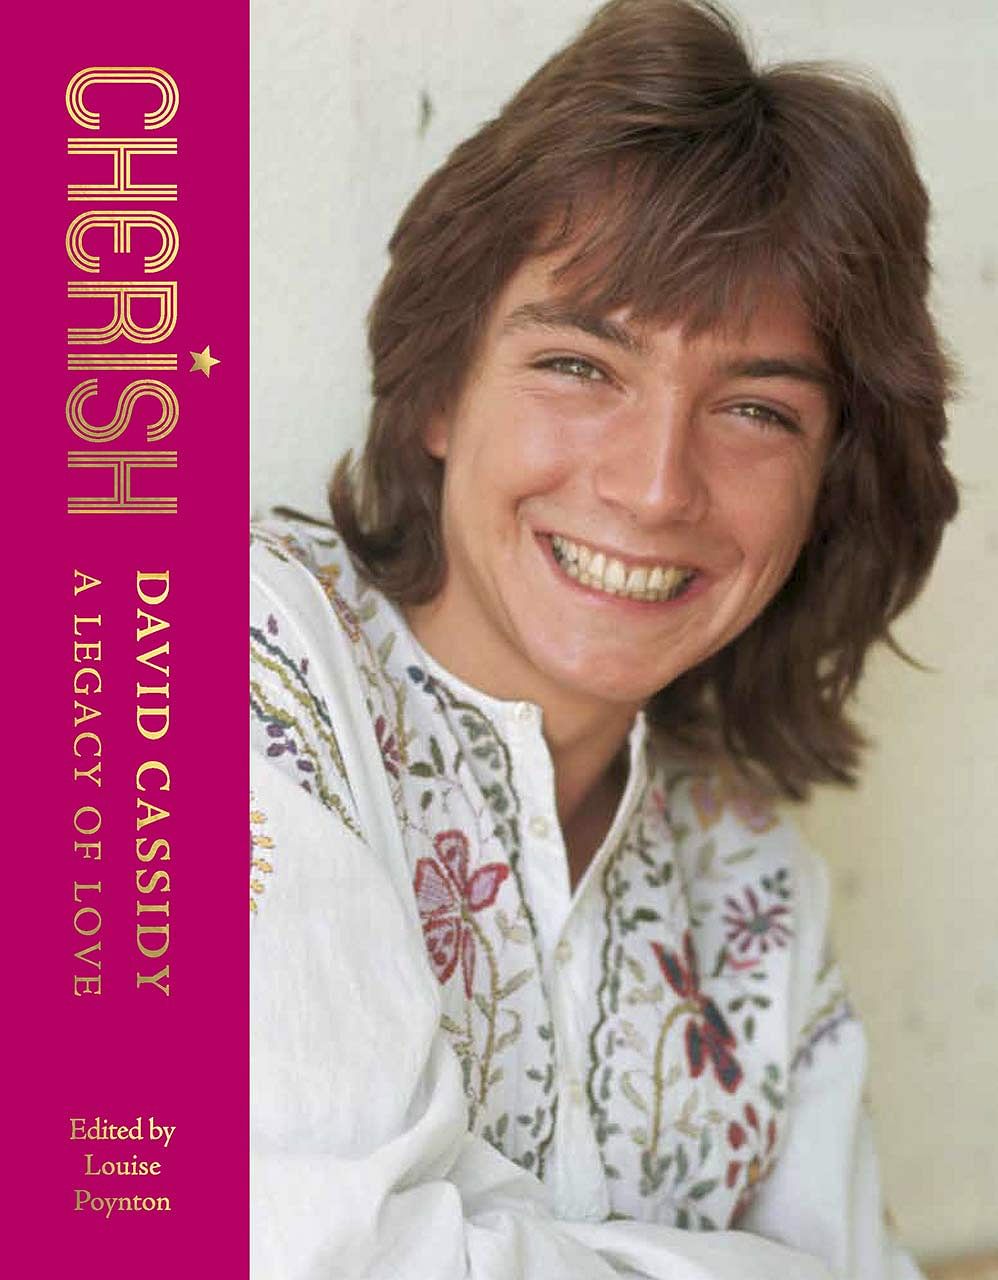 Cherish: David Cassidy - A Legacy of Love - Multicolor - 256 pages- Paperback.